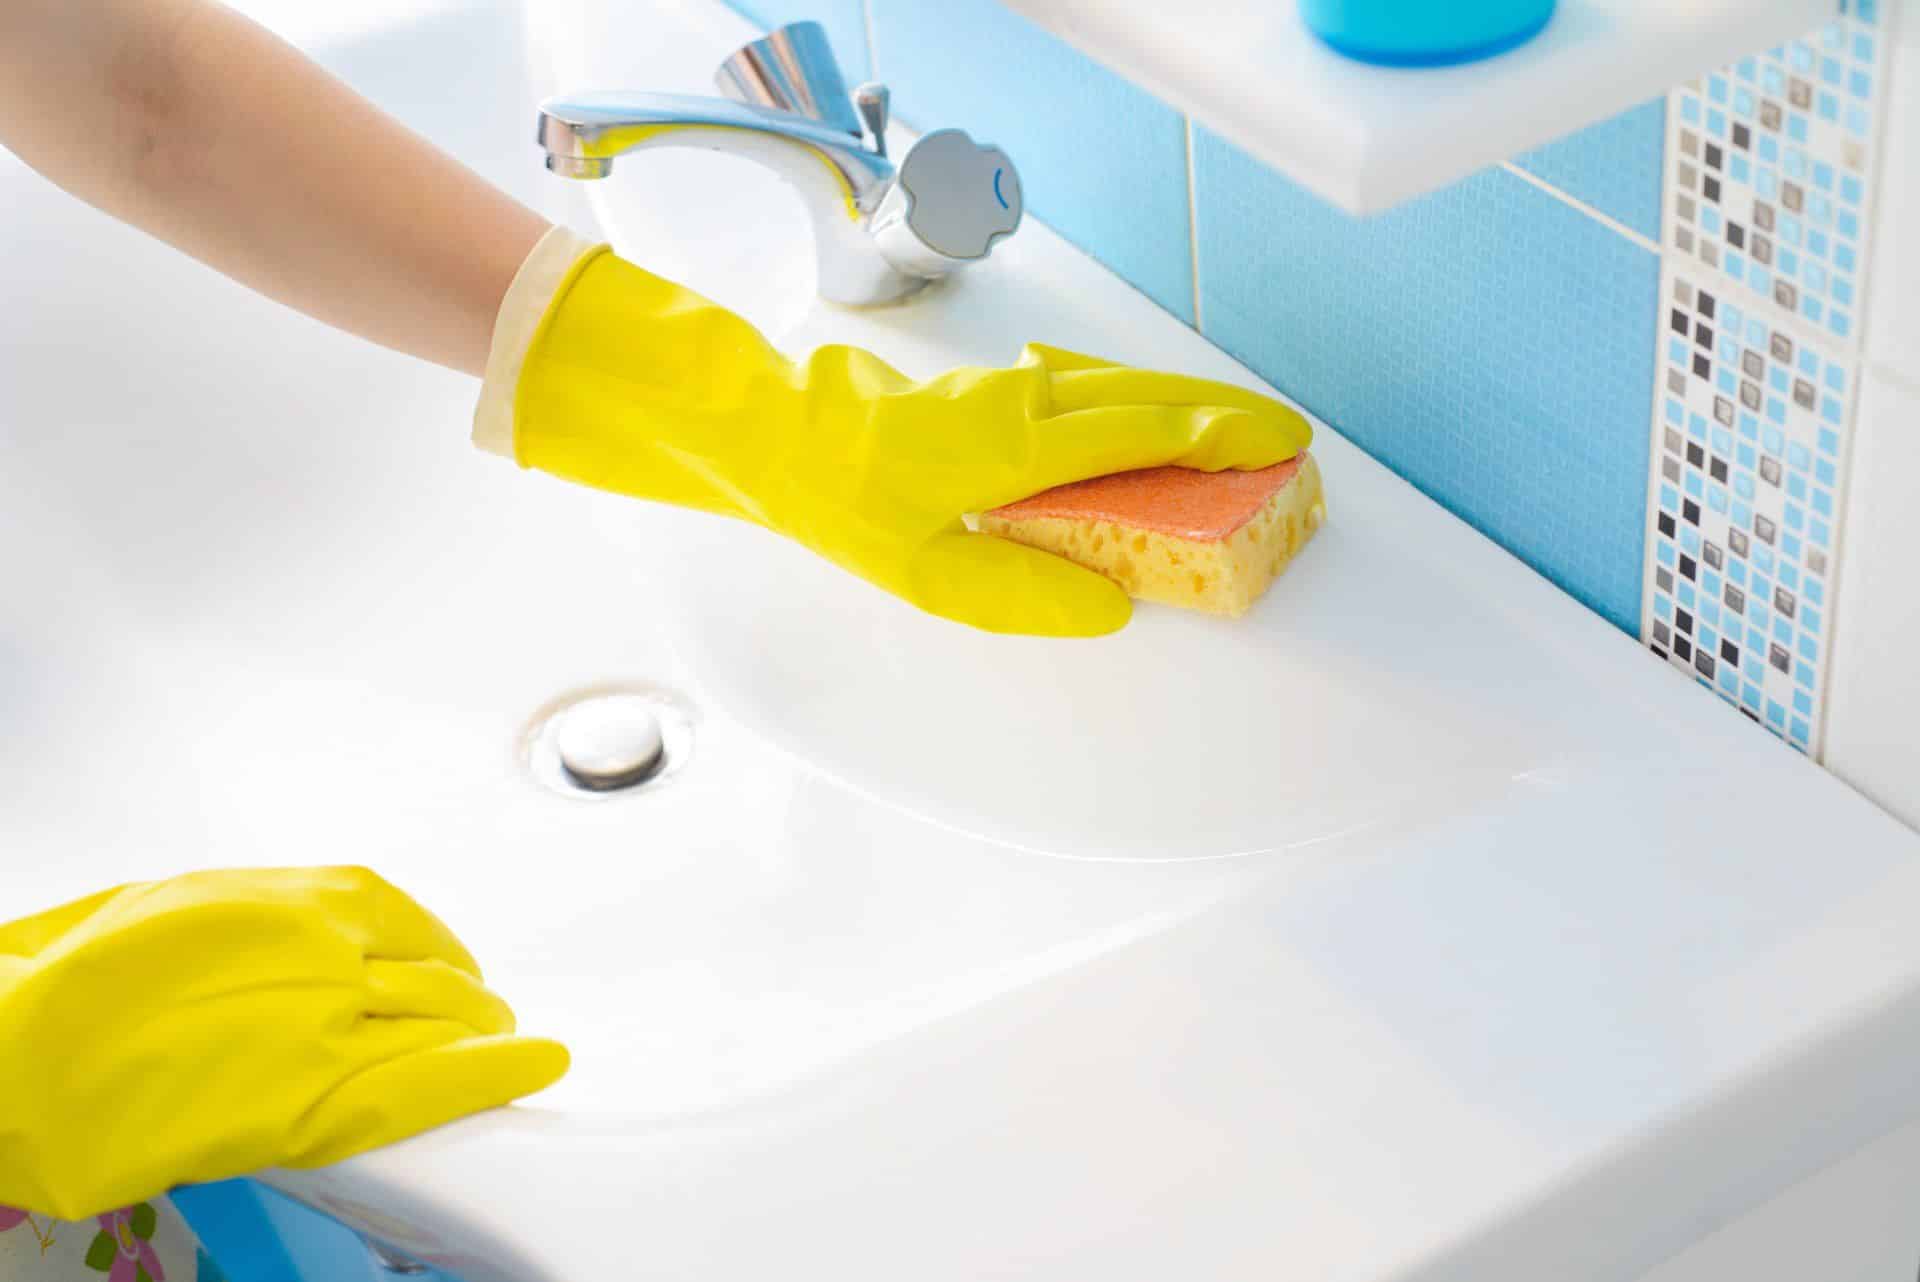 person cleaning bathroom sink with bleach and sponge while wearing yellow gloves